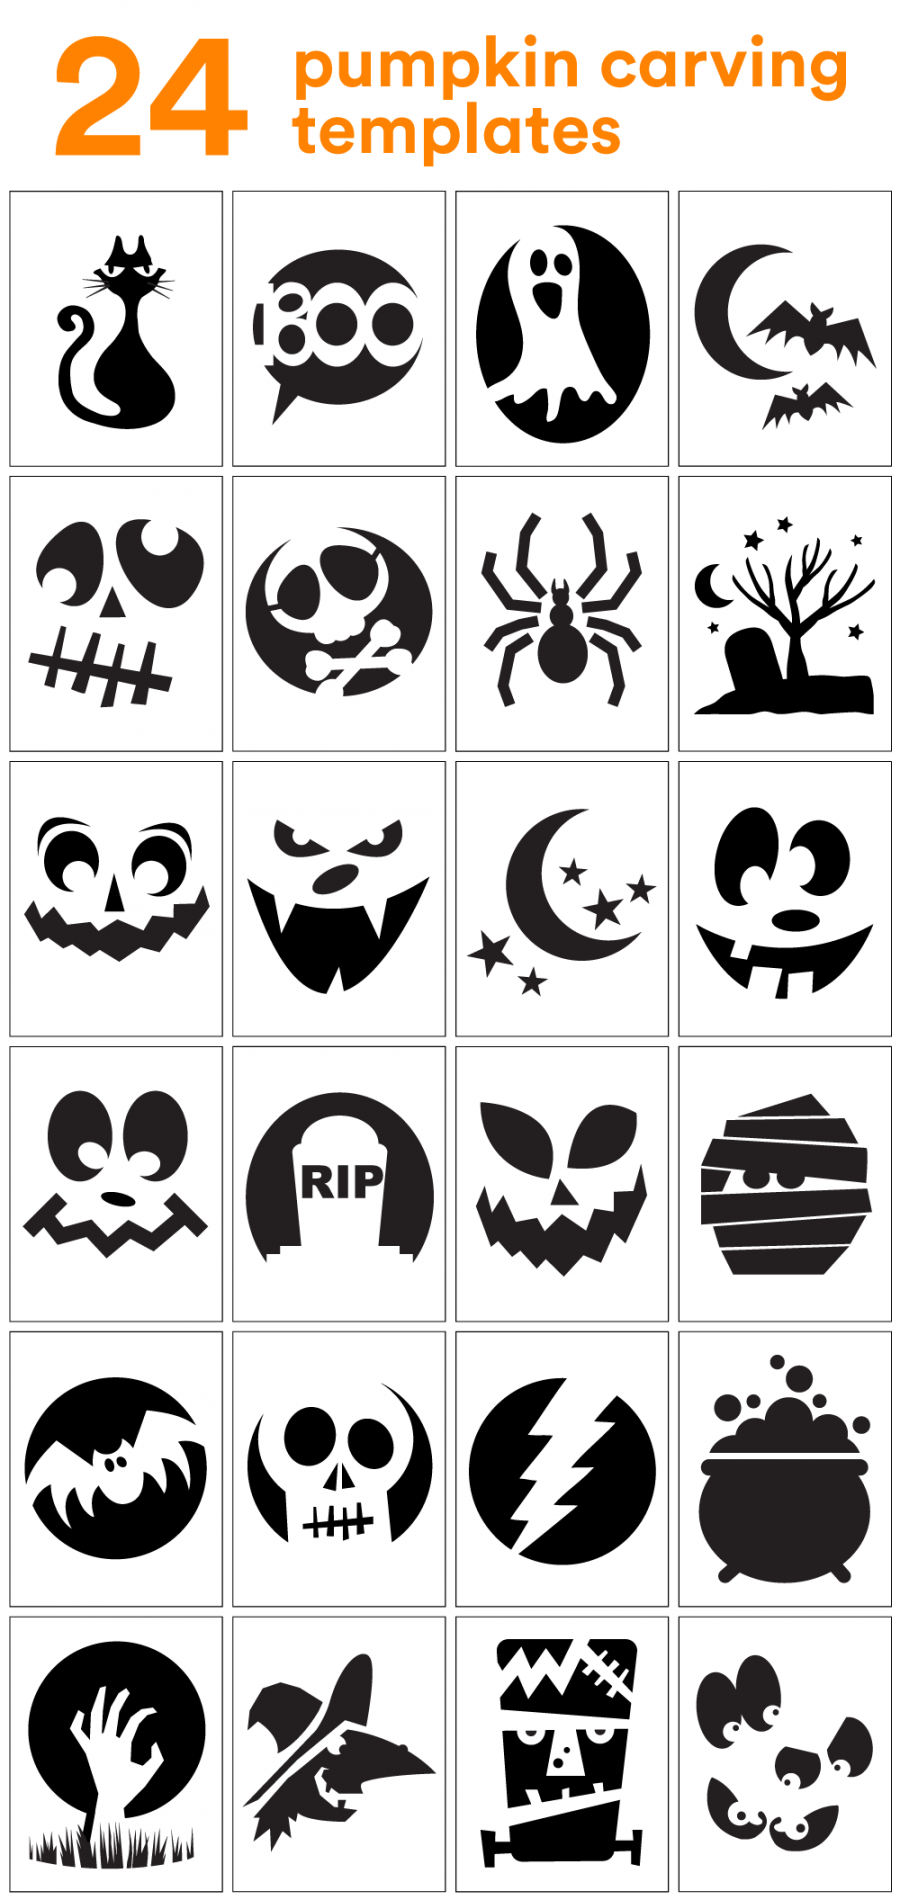 Pumpkin Carving Stencils Printable Free - Printable - How to Carve the Coolest Pumpkin on the Block (Carving Stencils